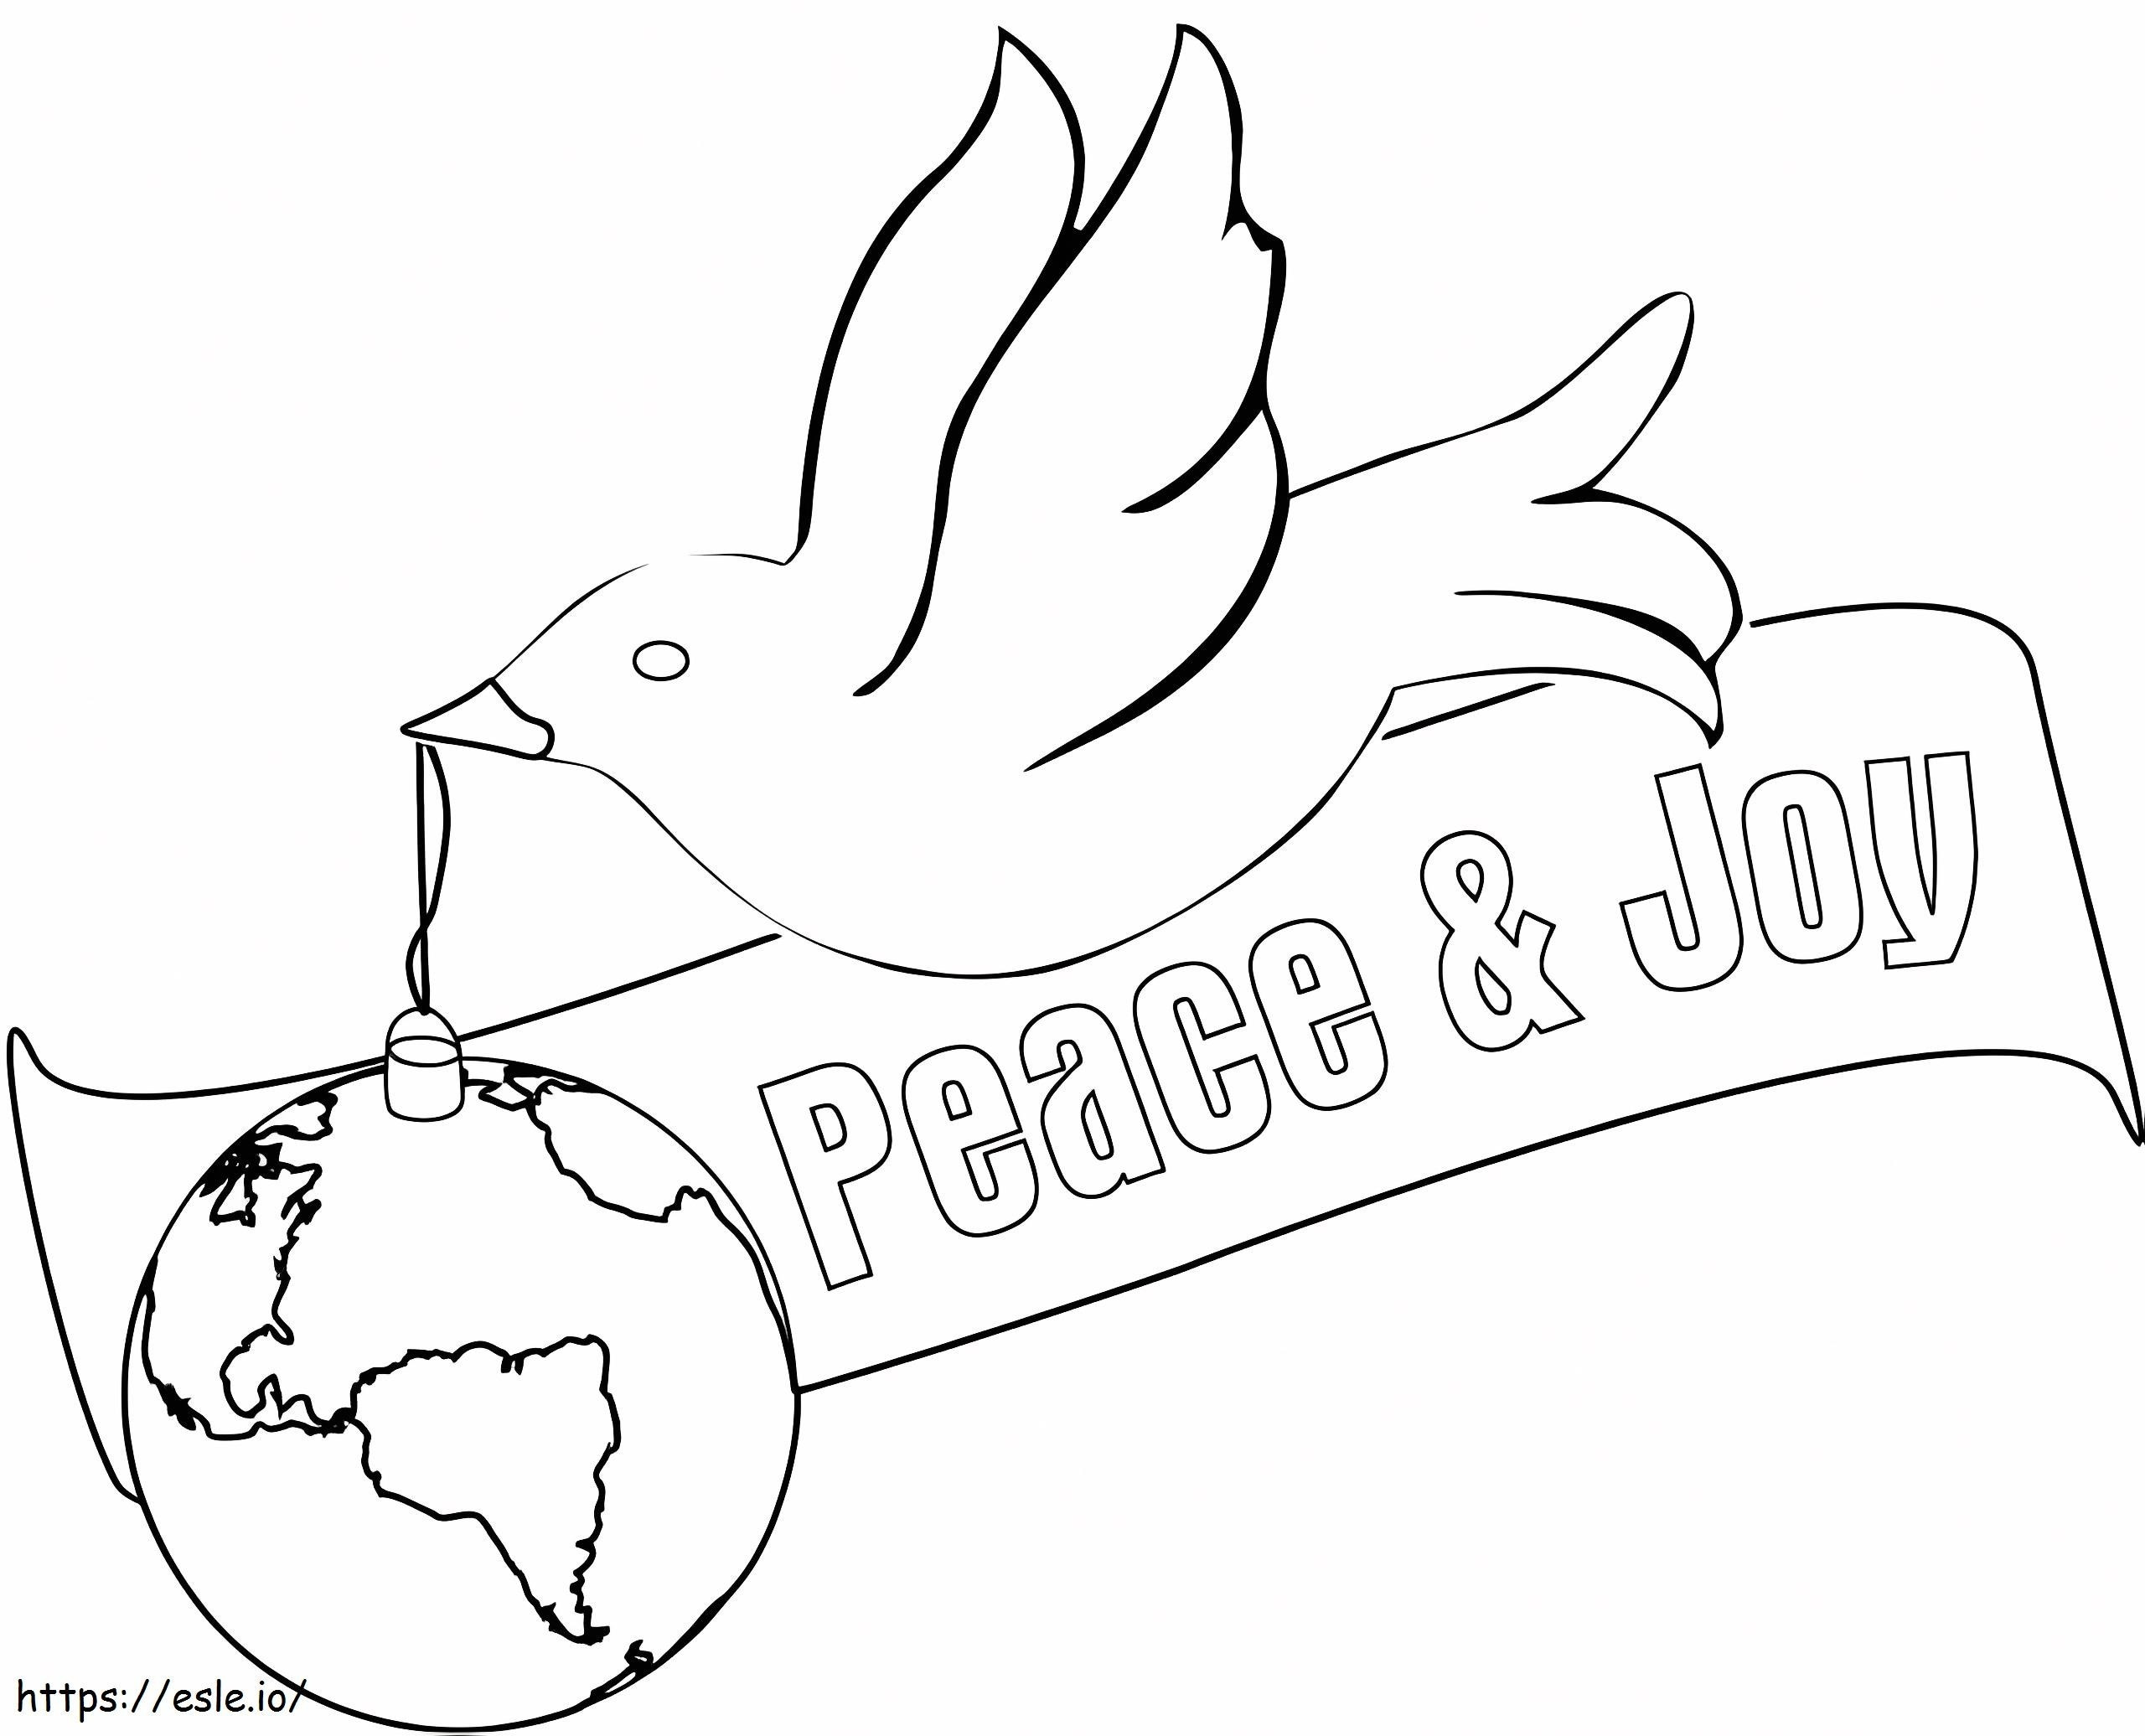 Peace And Joy coloring page